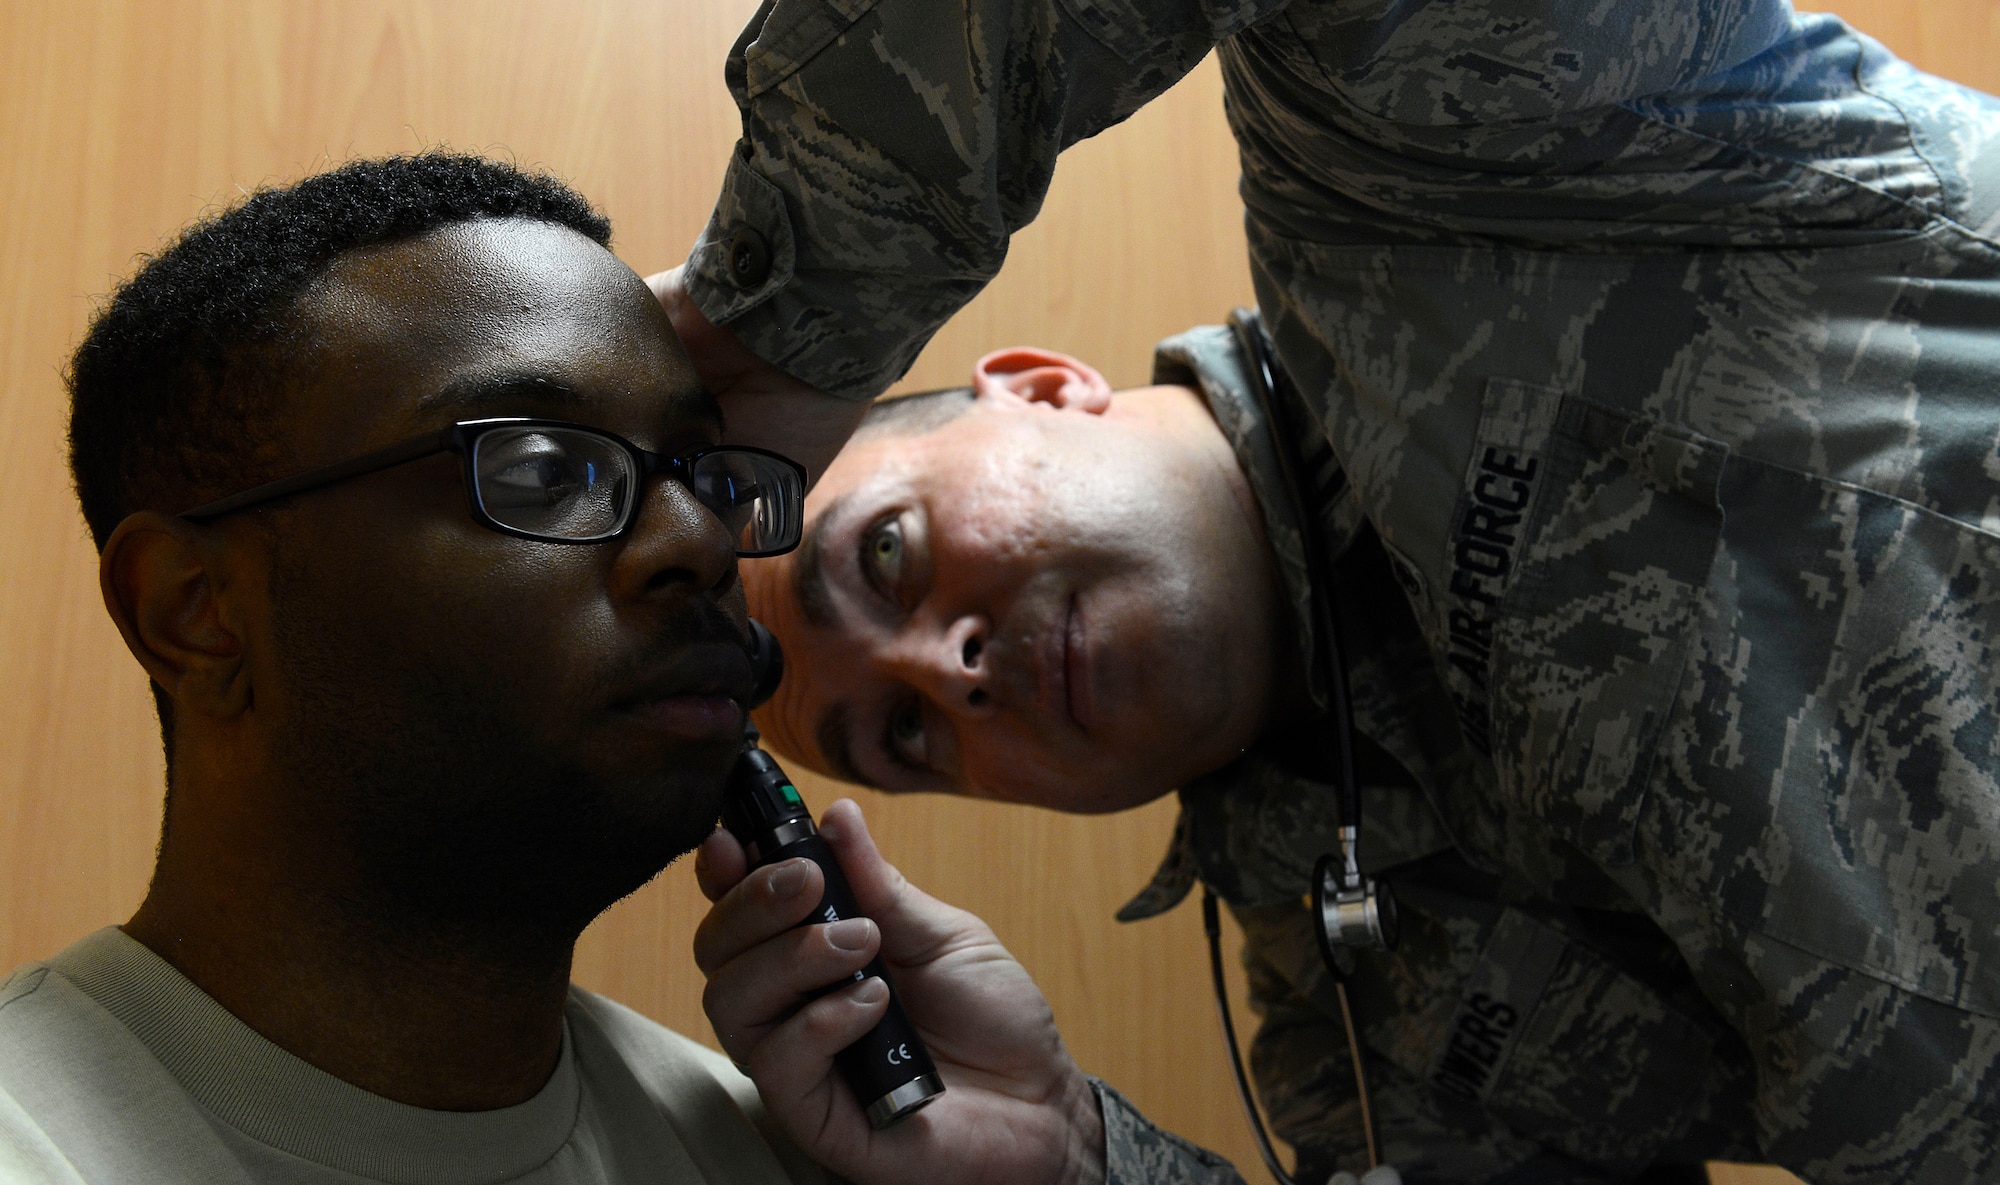 Capt. Foye Flowers, Family Health Clinic clinical nurse, looks in the ear of Senior Airman Markeith Davis, 1st Combat Communications radio frequencies transmission technician, at the Cold and Allergy Clinic at Ramstein Air Base, Germany, Nov. 4, 2015. The new clinic was opened to help relieve the increased volume of patients coming to the Family Health Clinic who are suffering from symptoms associated with common ailments during the winter and spring seasons. (U.S. Air Force photo/Airman 1st Class Tryphena Mayhugh)